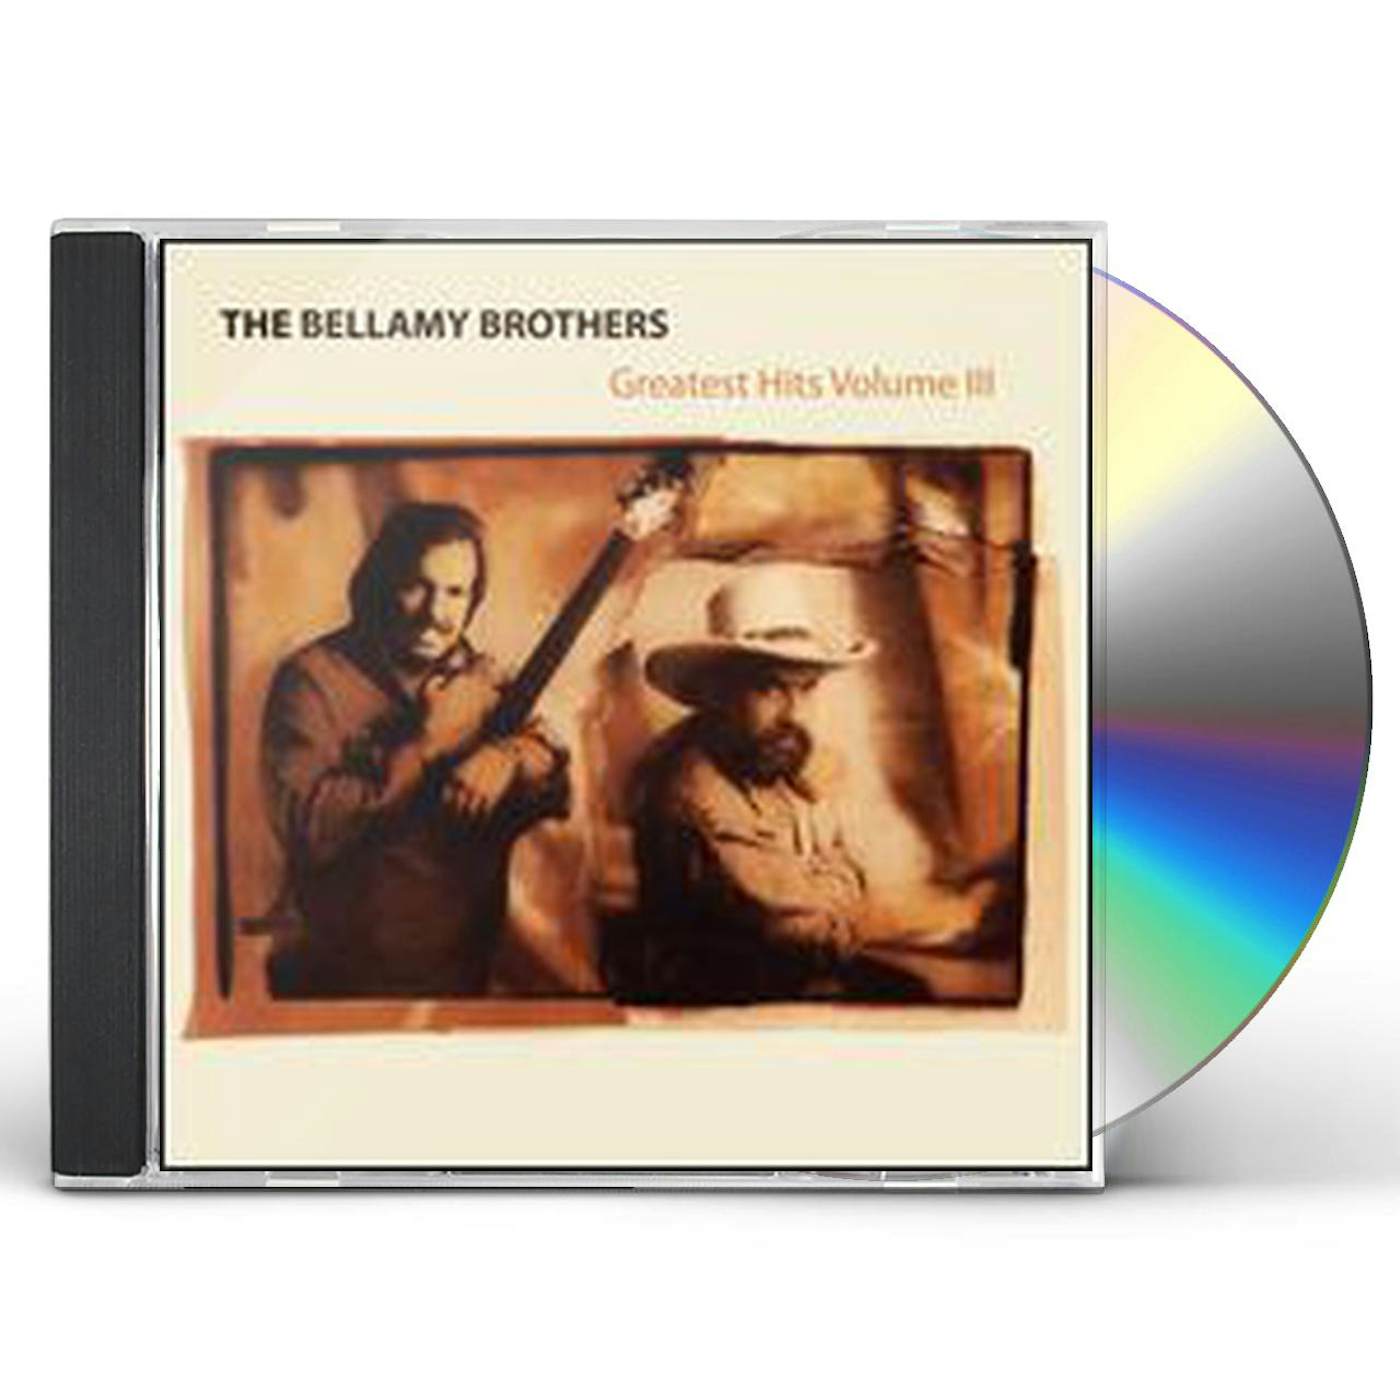 The Bellamy Brothers GREATEST HITS VOLUME III CD